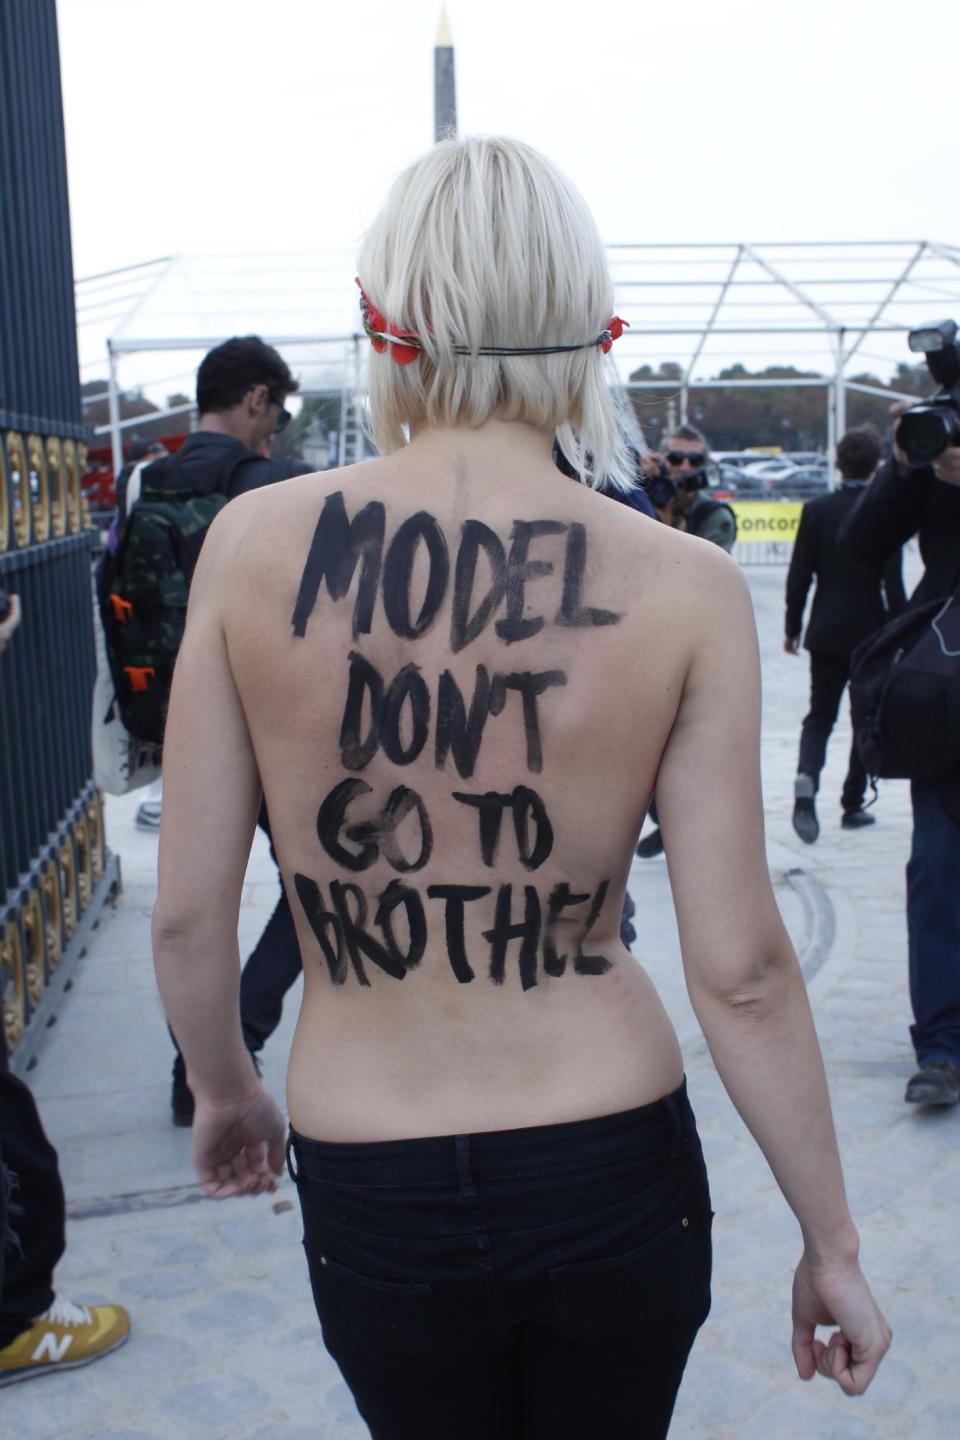 An activist of Femen, a feminist Ukrainian protest group, leaves the Tuileries Gardens after two of them were removed by security staff while disturbing the presentation of Nina Ricci's ready-to-wear Spring/Summer 2014 fashion collection Thursday, Sept. 26, 2013 in Paris. (AP Photo/Thibault Camus)